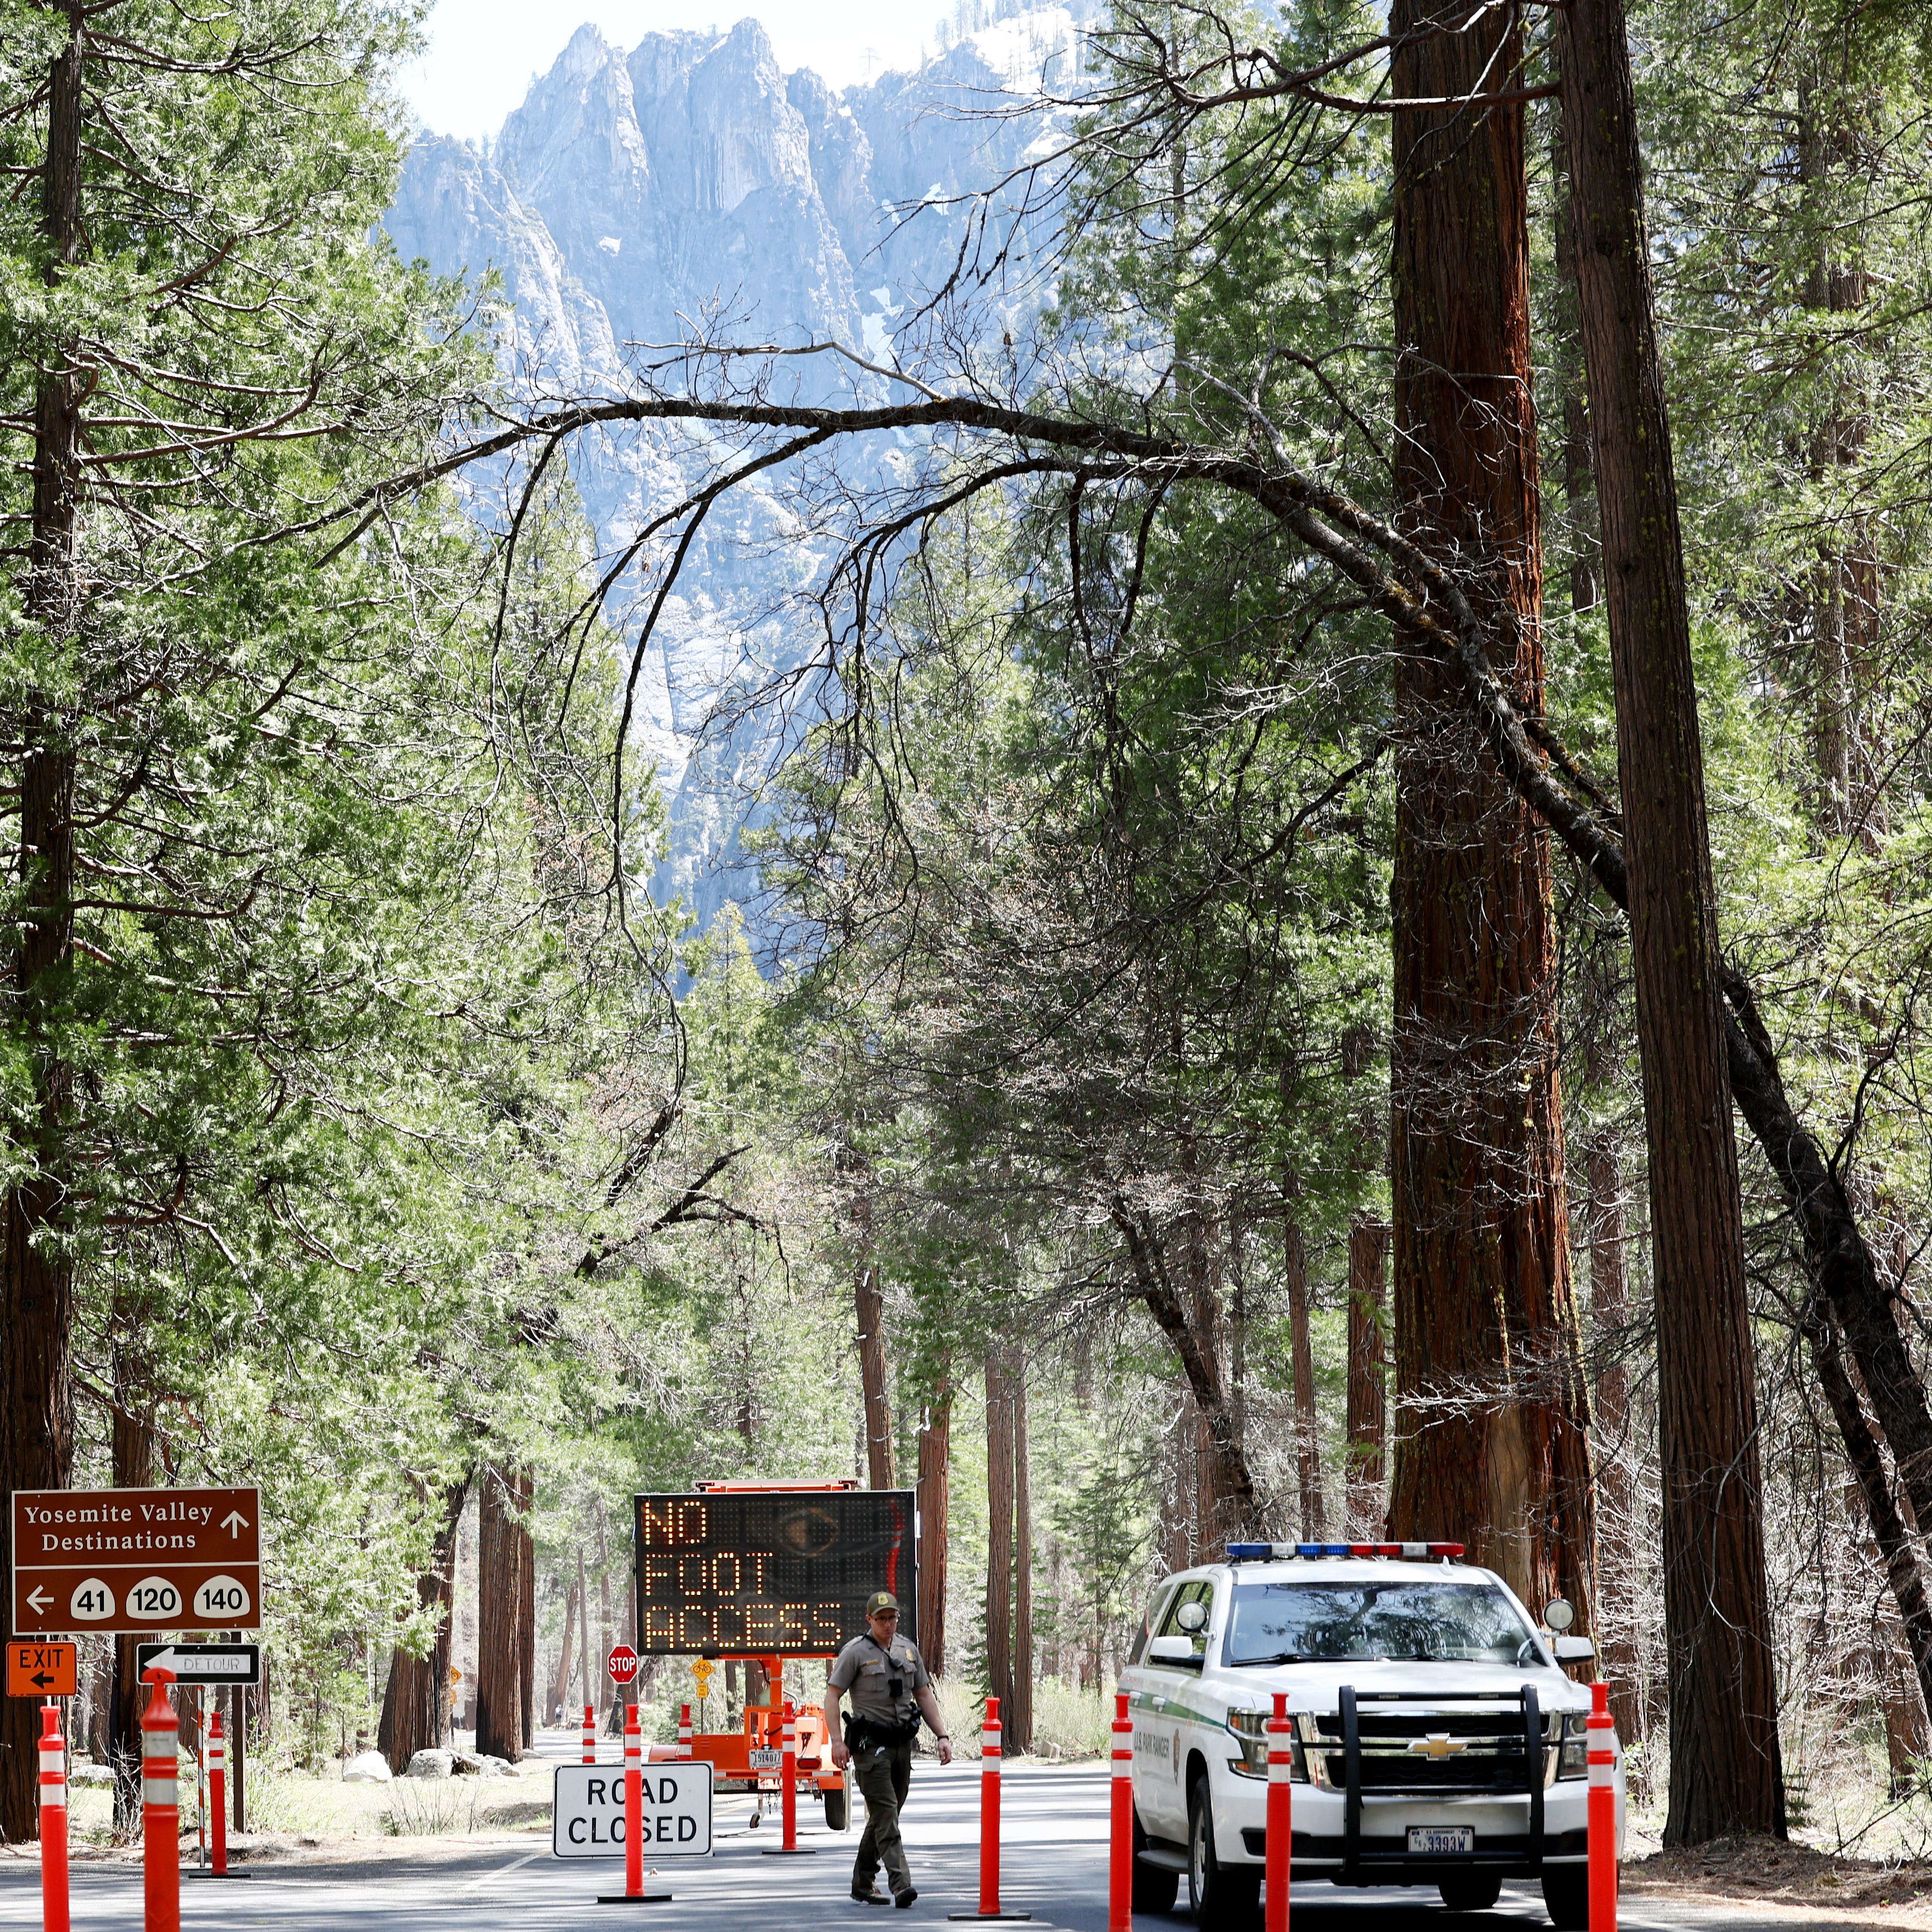 A park ranger keeps watch at a checkpoint for a road closed due to flooding in Yosemite Valley, as warming temperatures have increased snowpack runoff, on April 29, 2023 in Yosemite National Park, California. Most of Yosemite Valley is now closed because of the risk of extensive flooding from the melting snowpack amid a heat wave. As of April 1, snowpack in the Tuolumne River basin of Yosemite National Park was 244% of average amid record snowpack levels for some parts of California after years of drought.